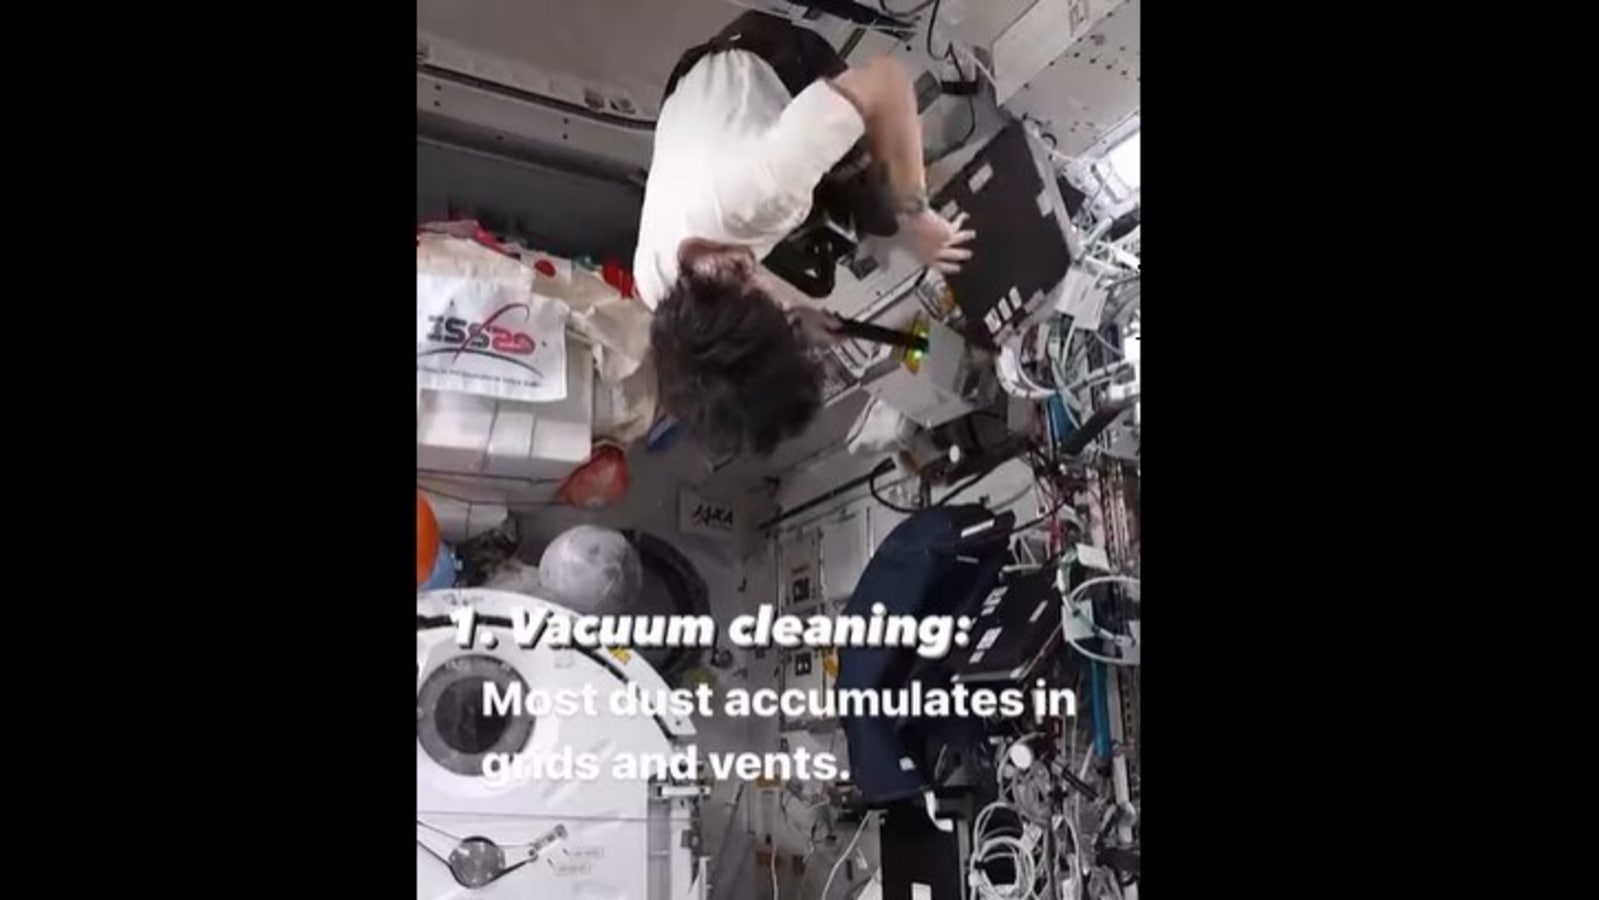 European Space Agency shows how astronauts do cleaning in space. Watch ...